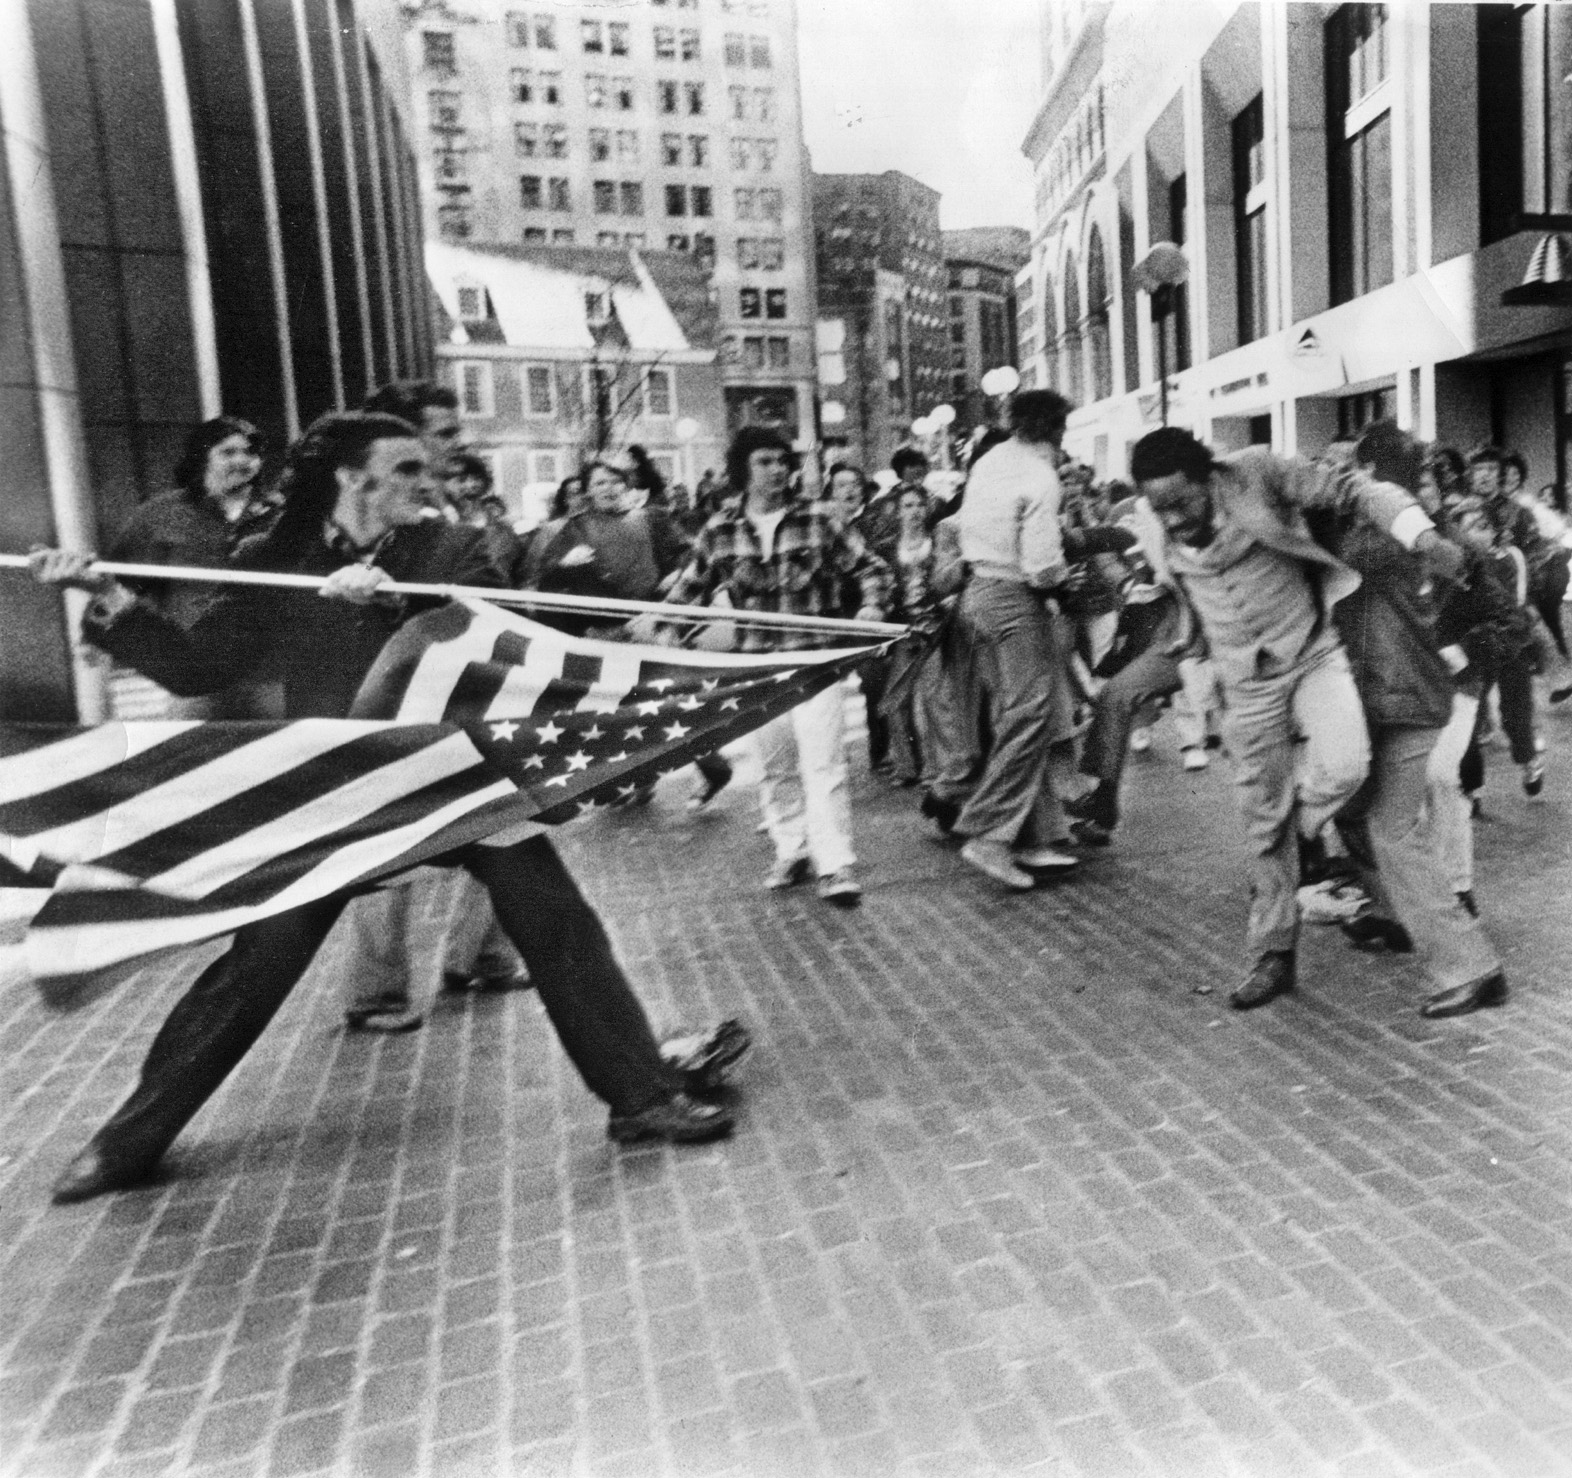 During the the early '70s, when Boston schools were being desegregated, attorney Teddy Landsmark was assaulted by a man at a protest. Landsmark was just walking by. Photo: Stanley Forman/Boston Herald